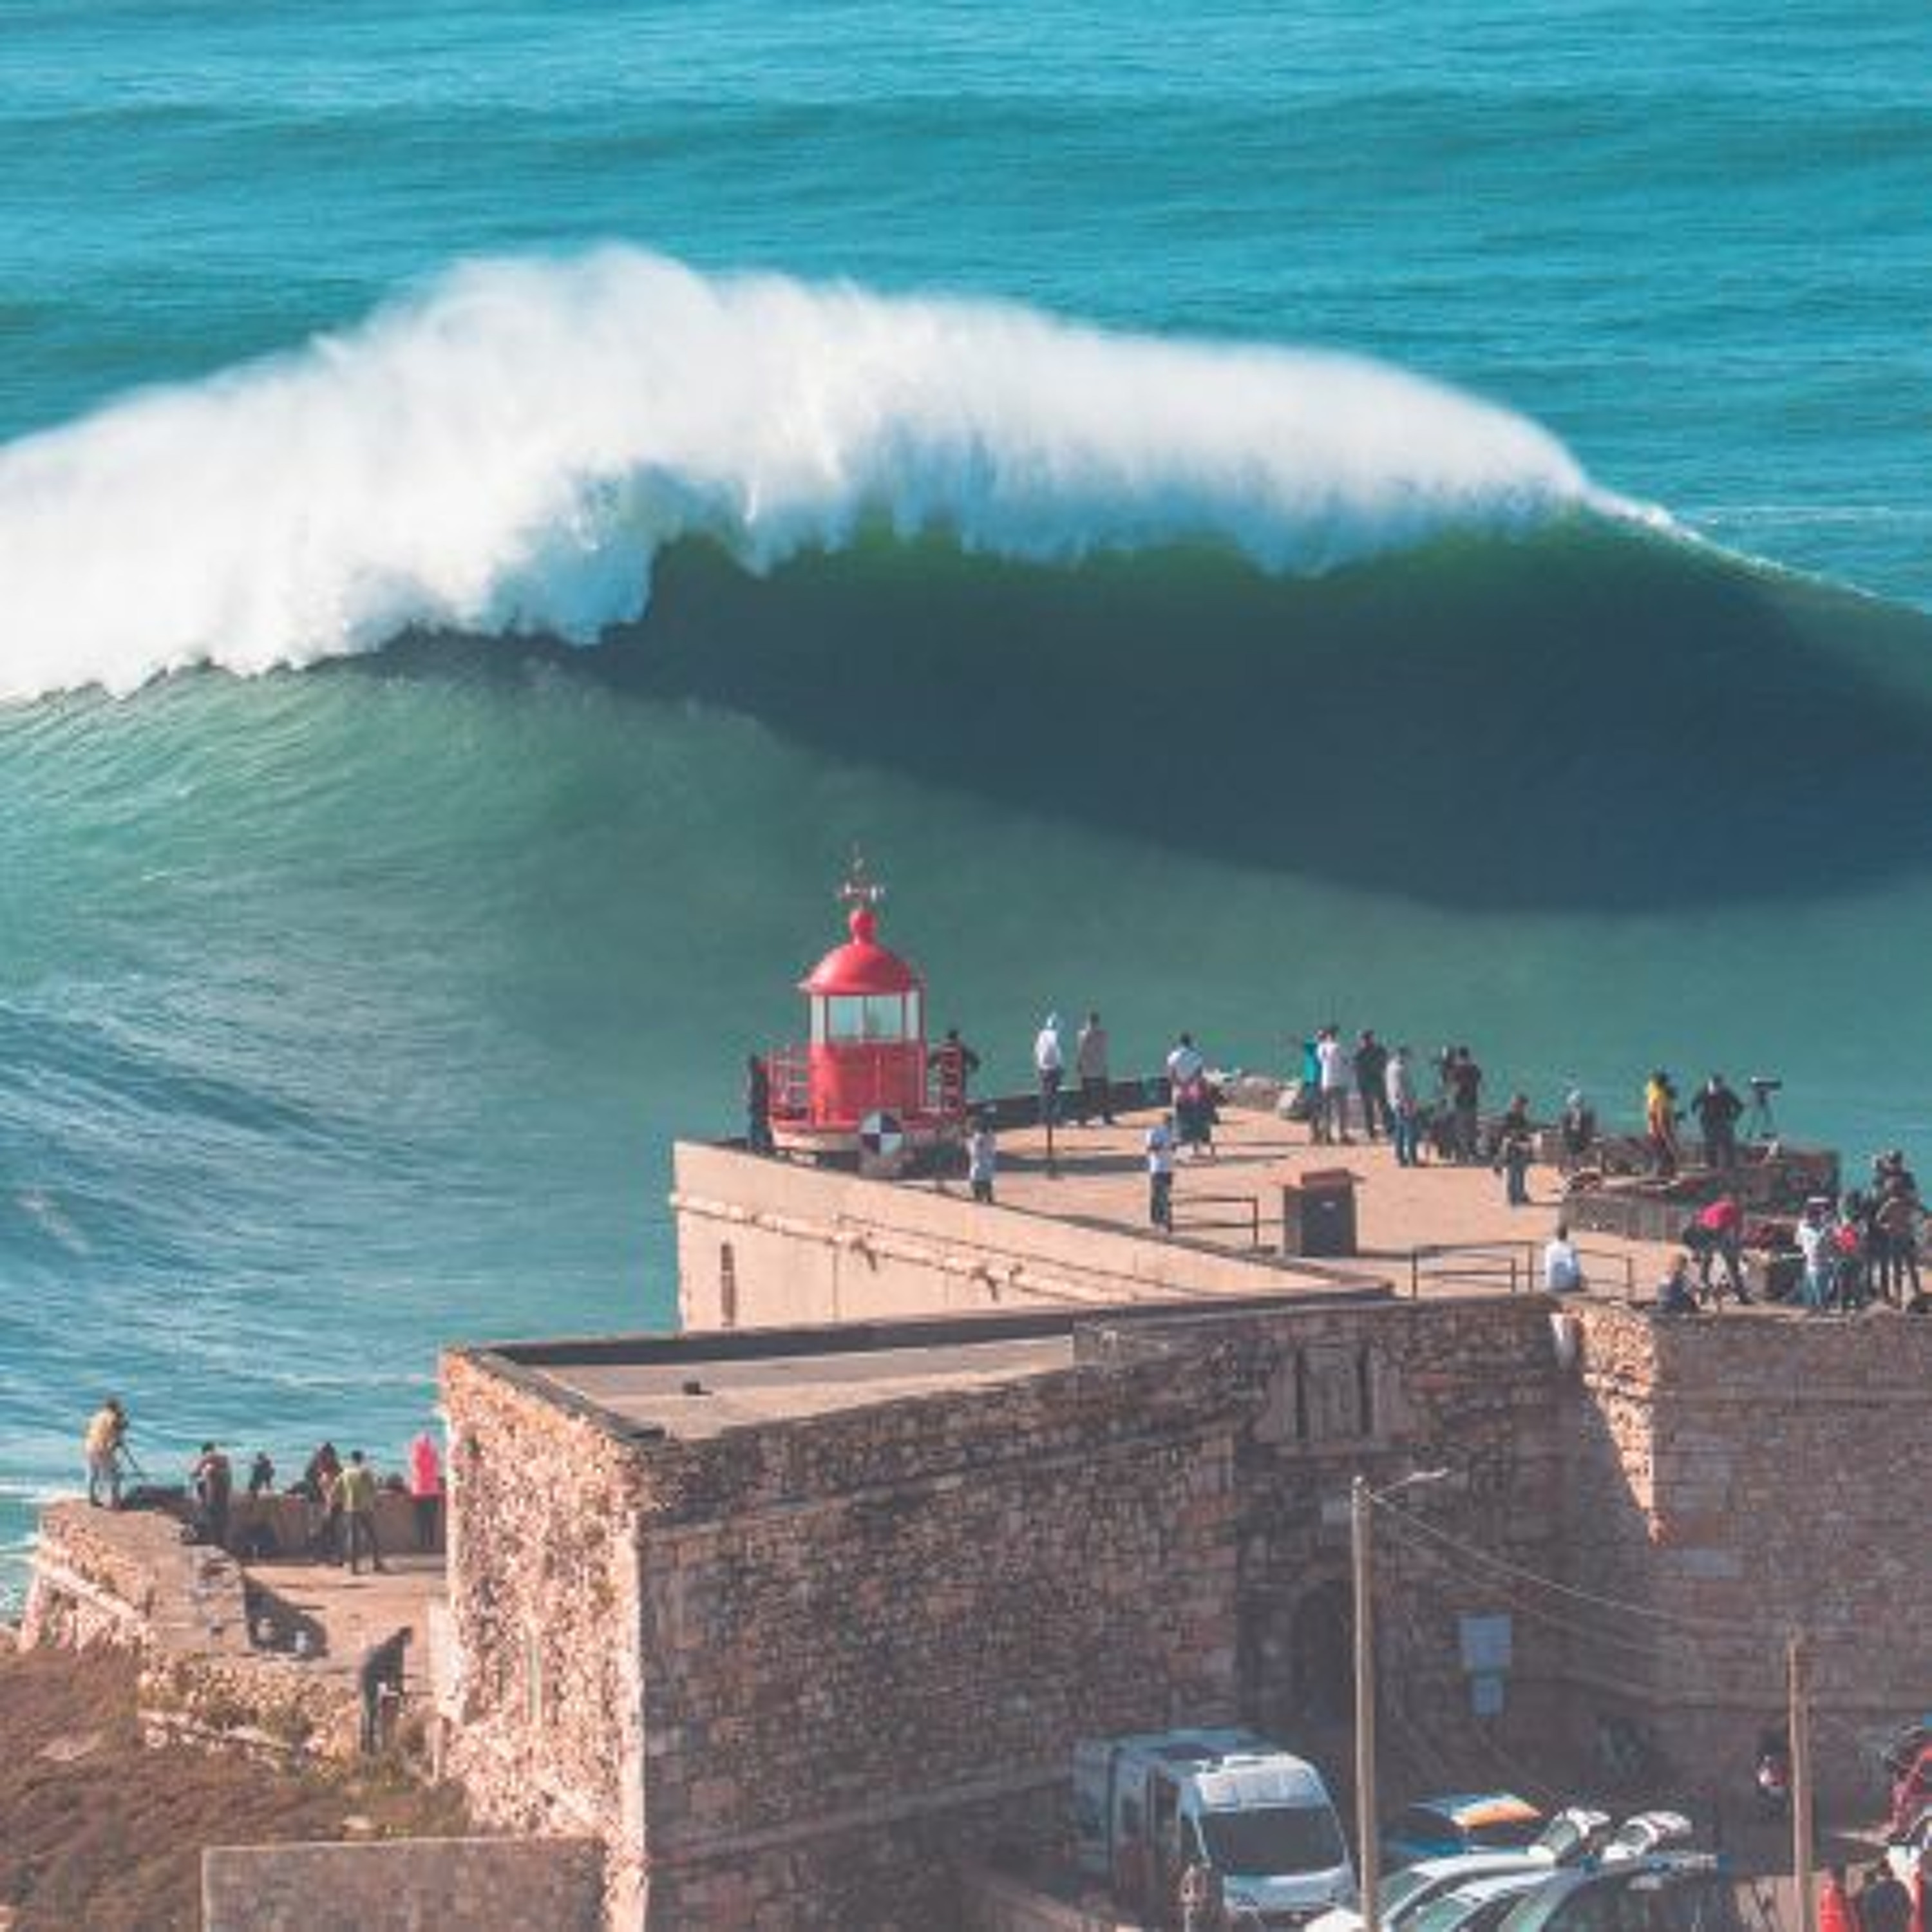 G-MAC on the ’Best Day Ever At Nazaré’